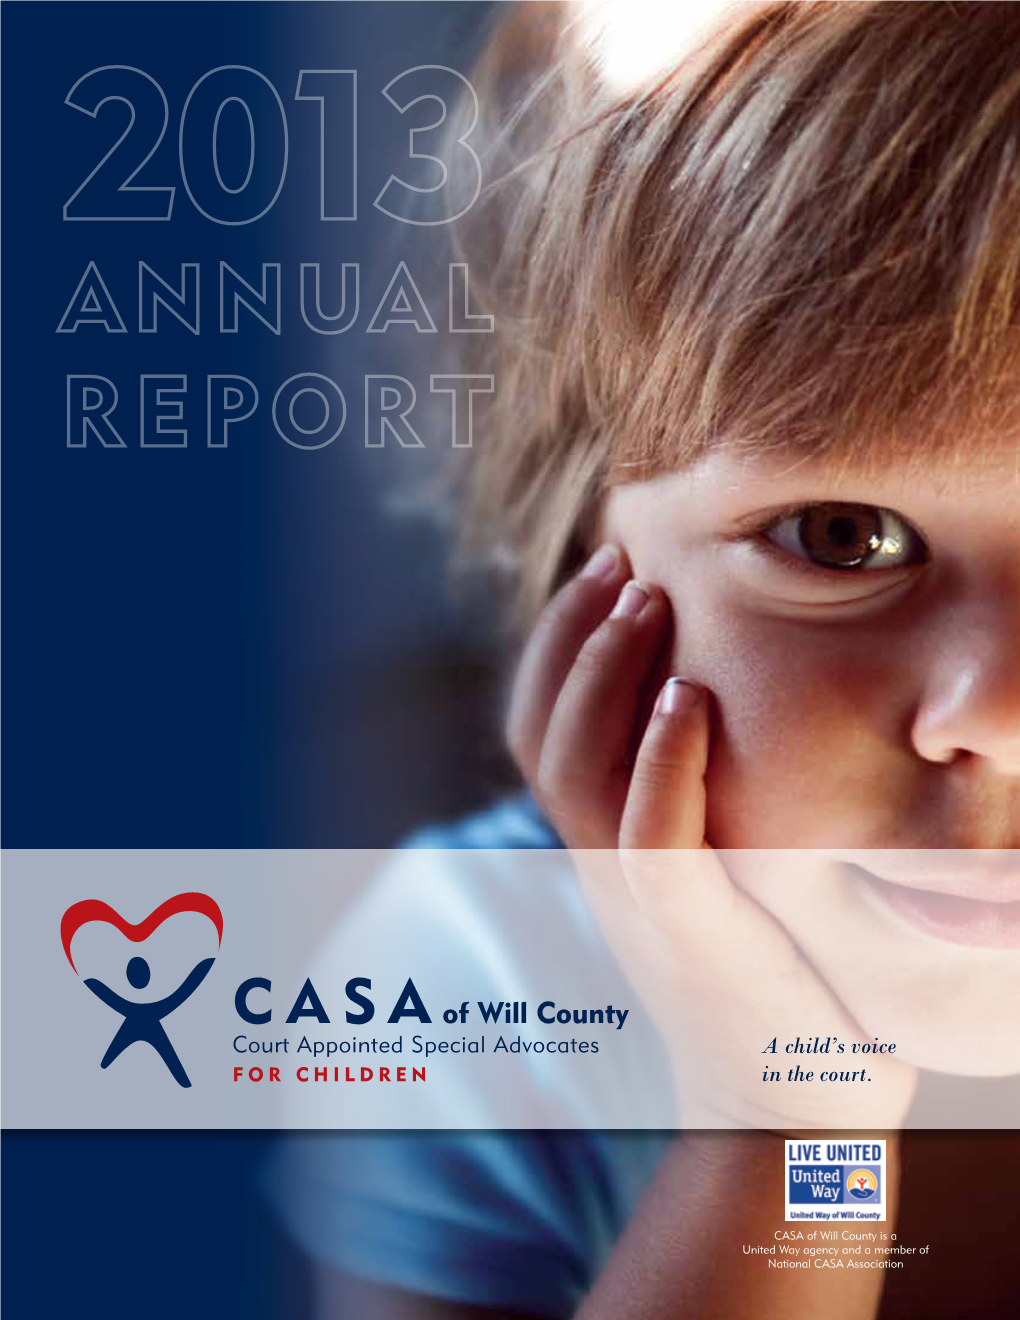 Casaof Will County Court Appointed Special Advocates a Child’S Voice for CHILDREN in the Court